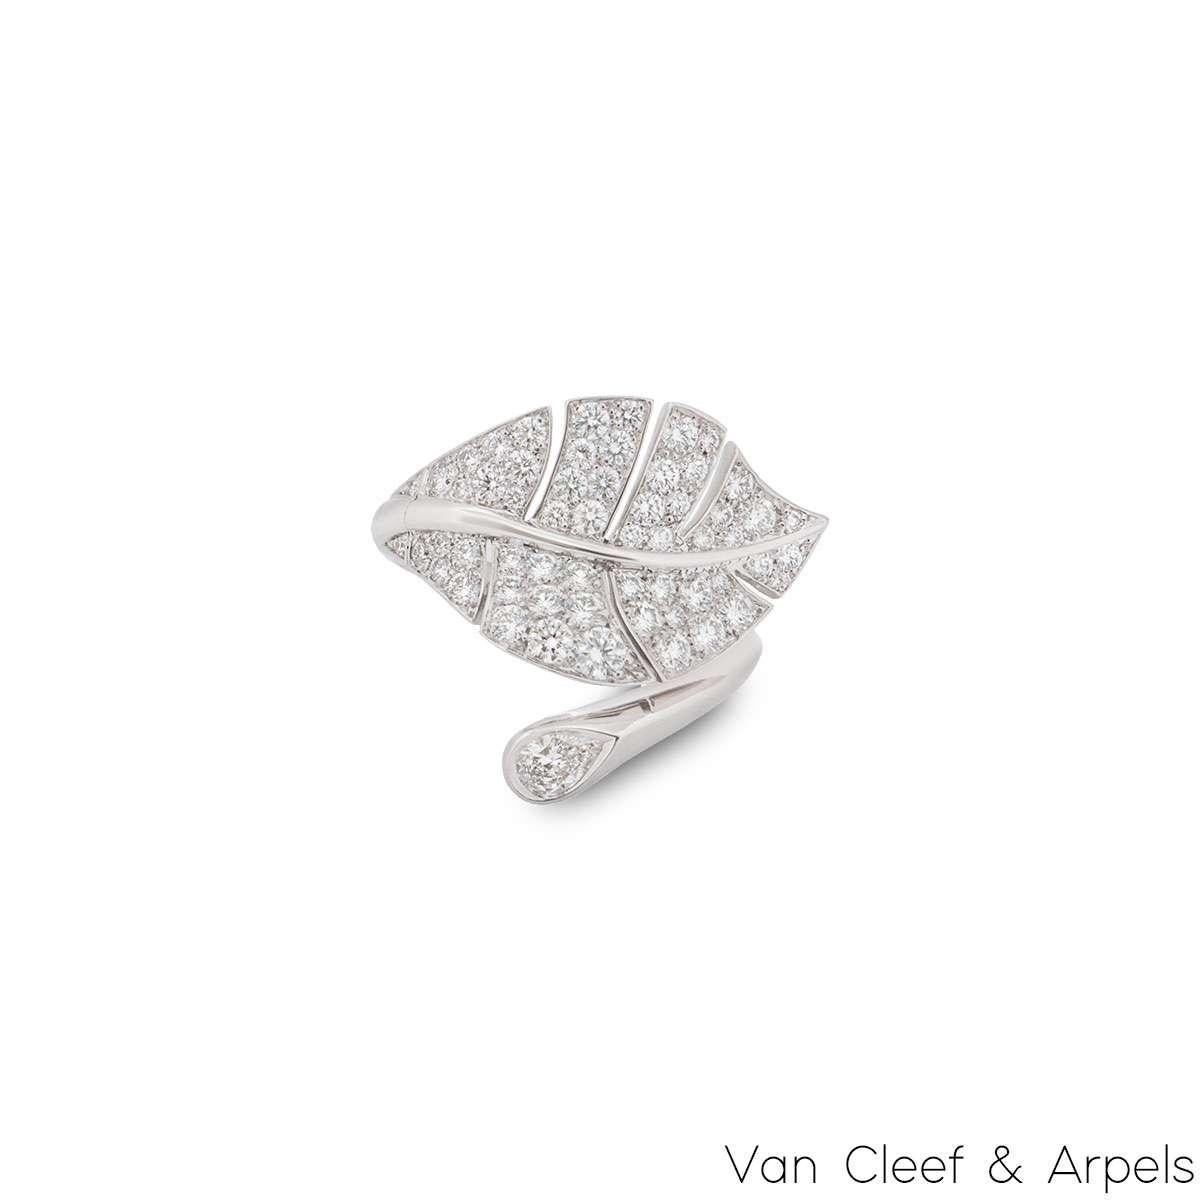 An 18k white gold diamond leaf ring by Van Cleef & Arpels from the Virevolte collection. The between the finger ring takes the form of a leaf which features a swivel mechanism that allows the leaf to be worn either open or closed. The ring is set